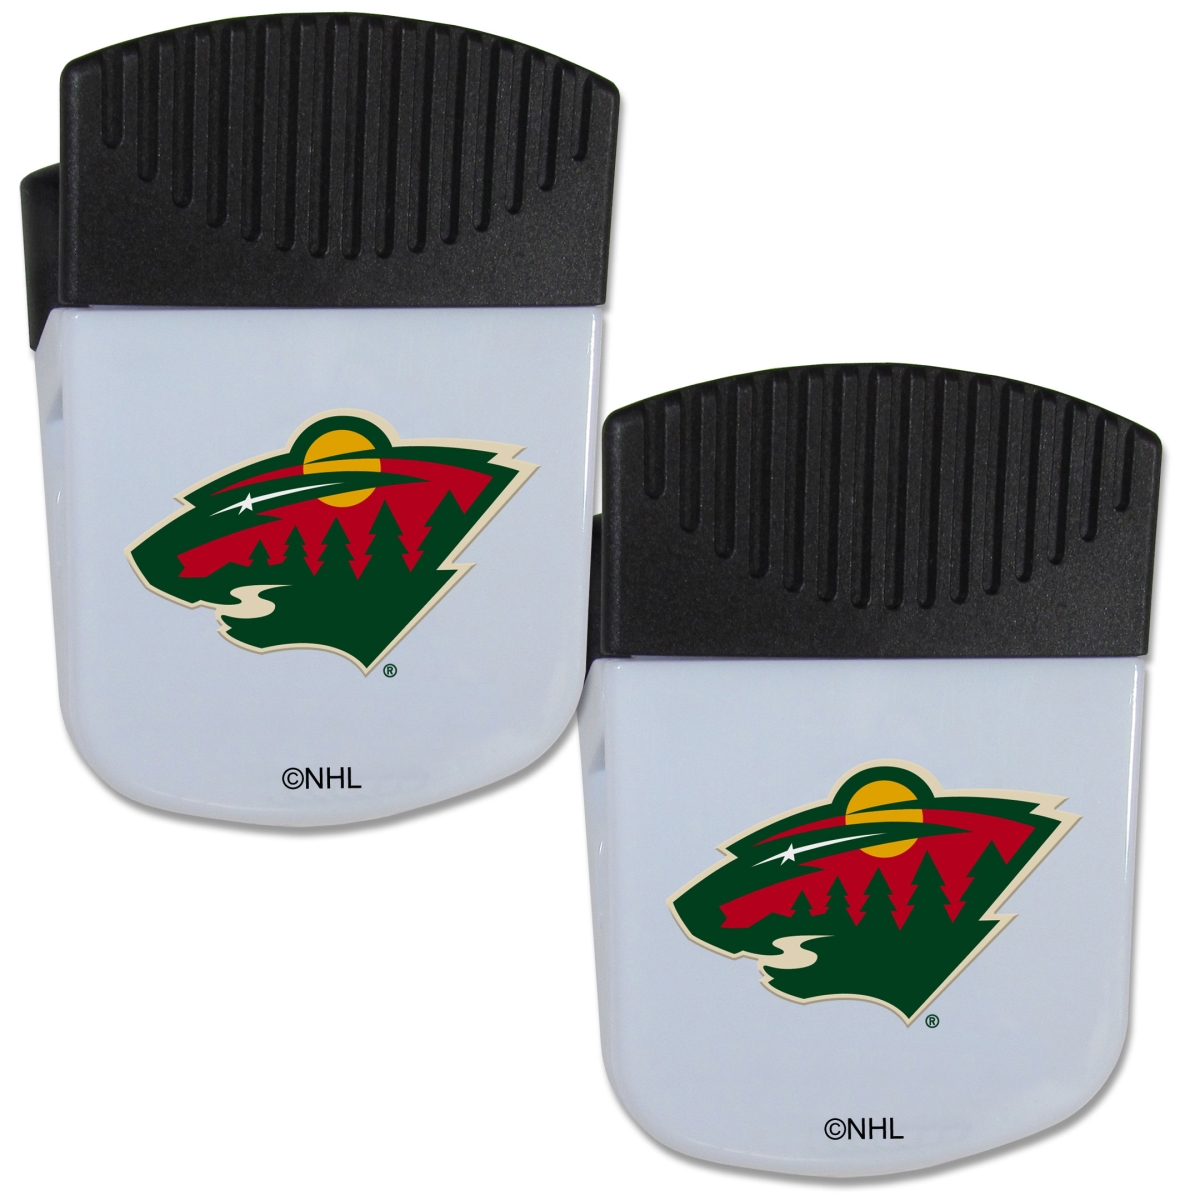 Picture of Siskiyou 2HPMC145 Unisex NHL Minnesota Wild Chip Clip Magnet with Bottle Opener - Pack of 2